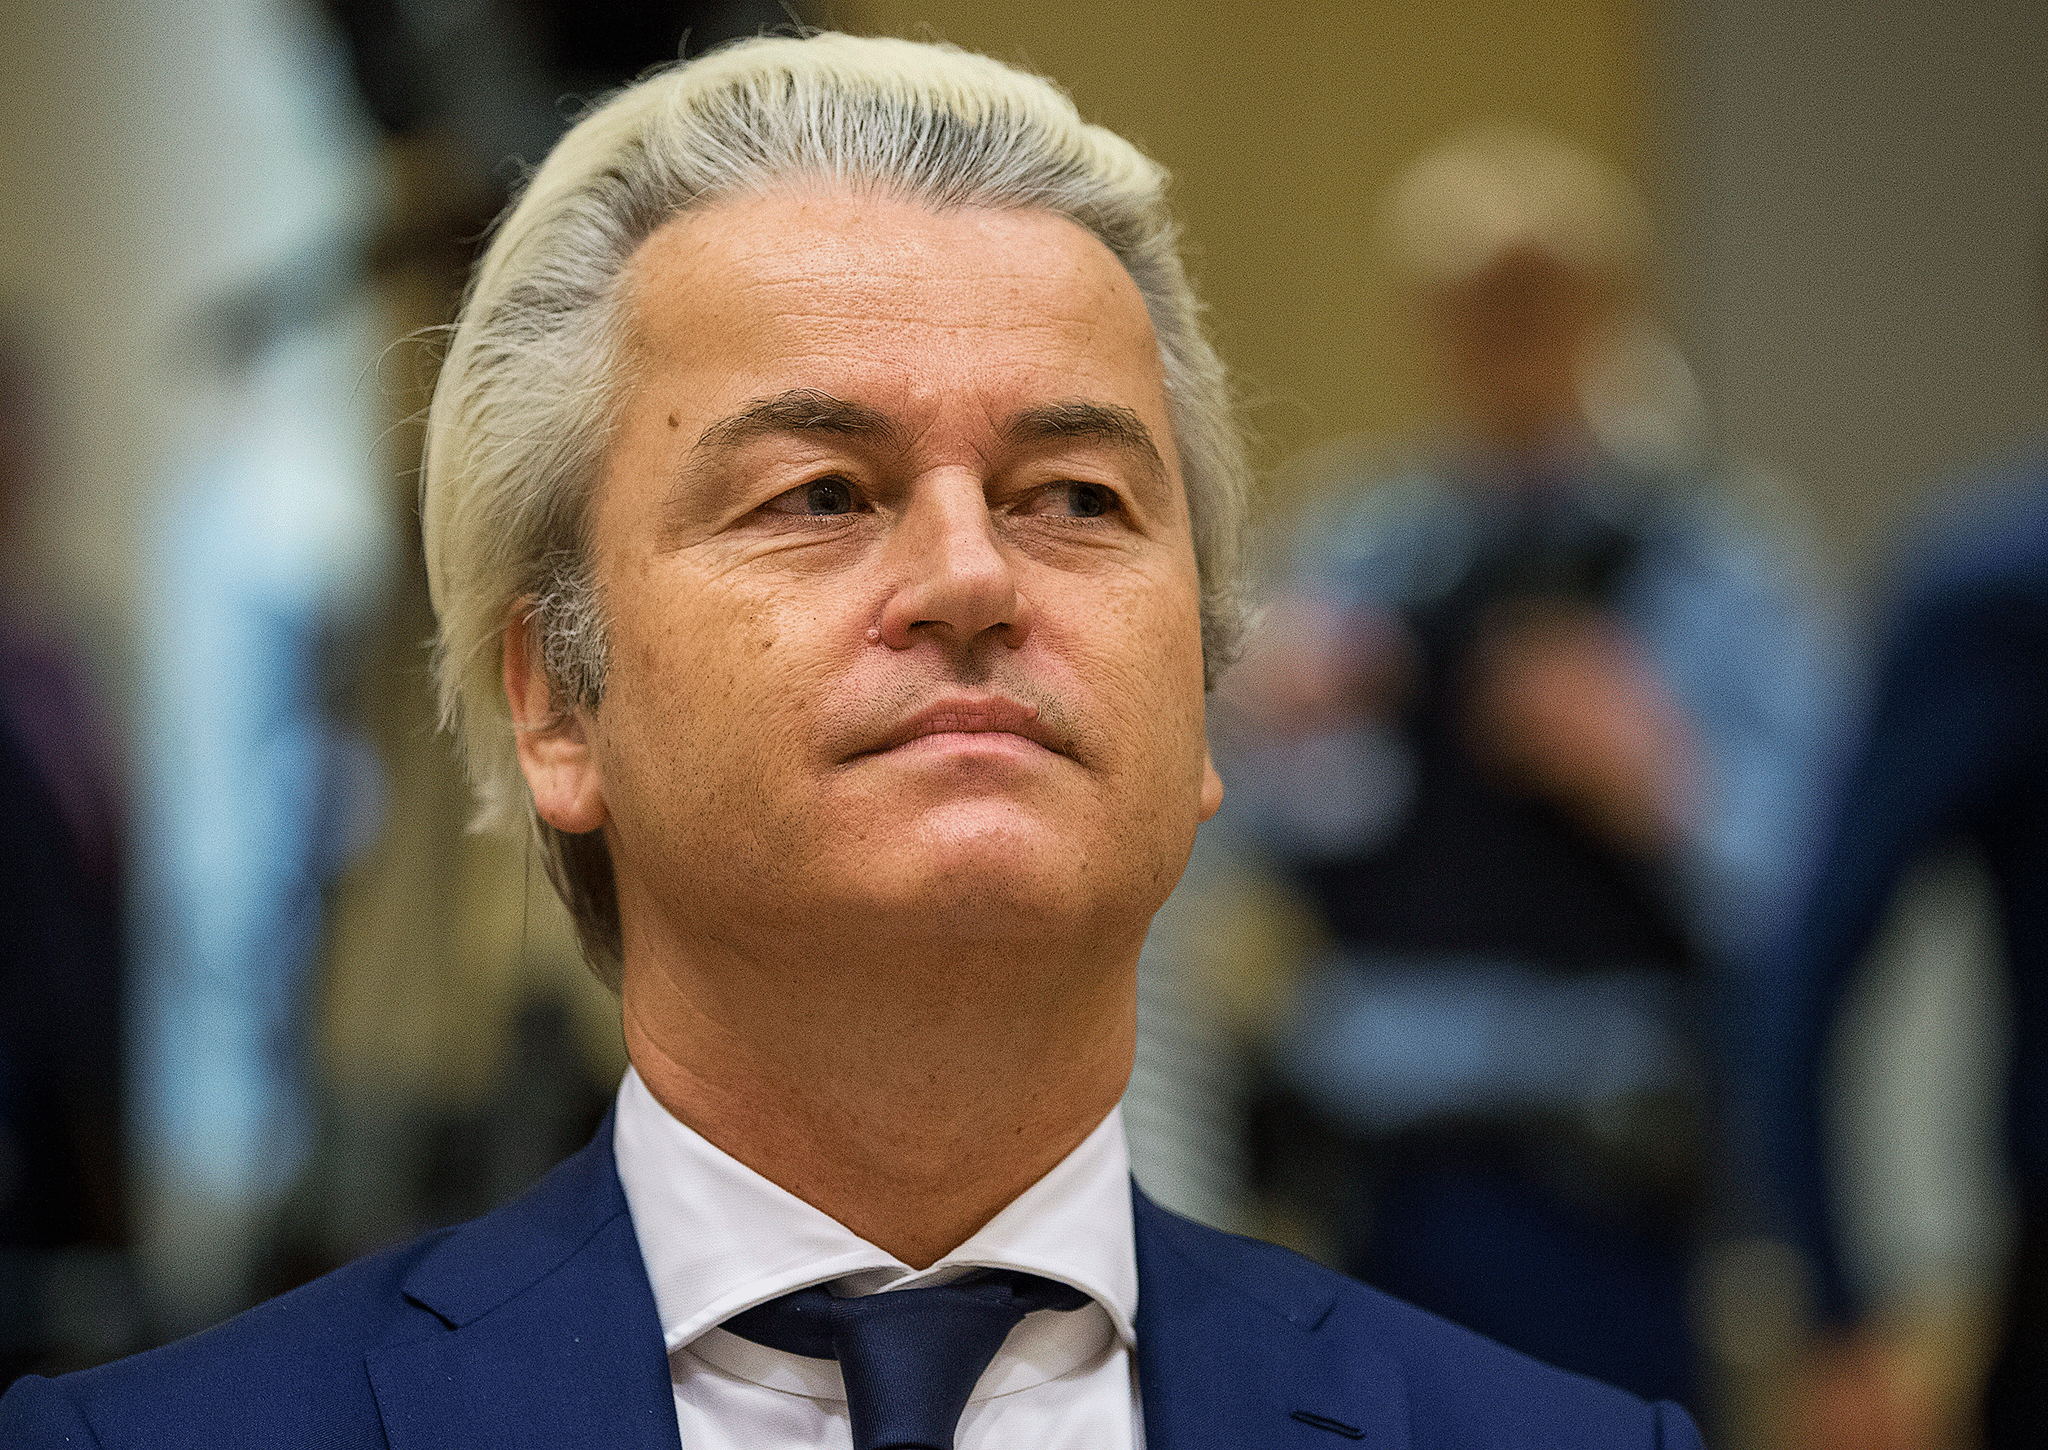 Geert Wilders rises in Dutch polls after hate crime conviction